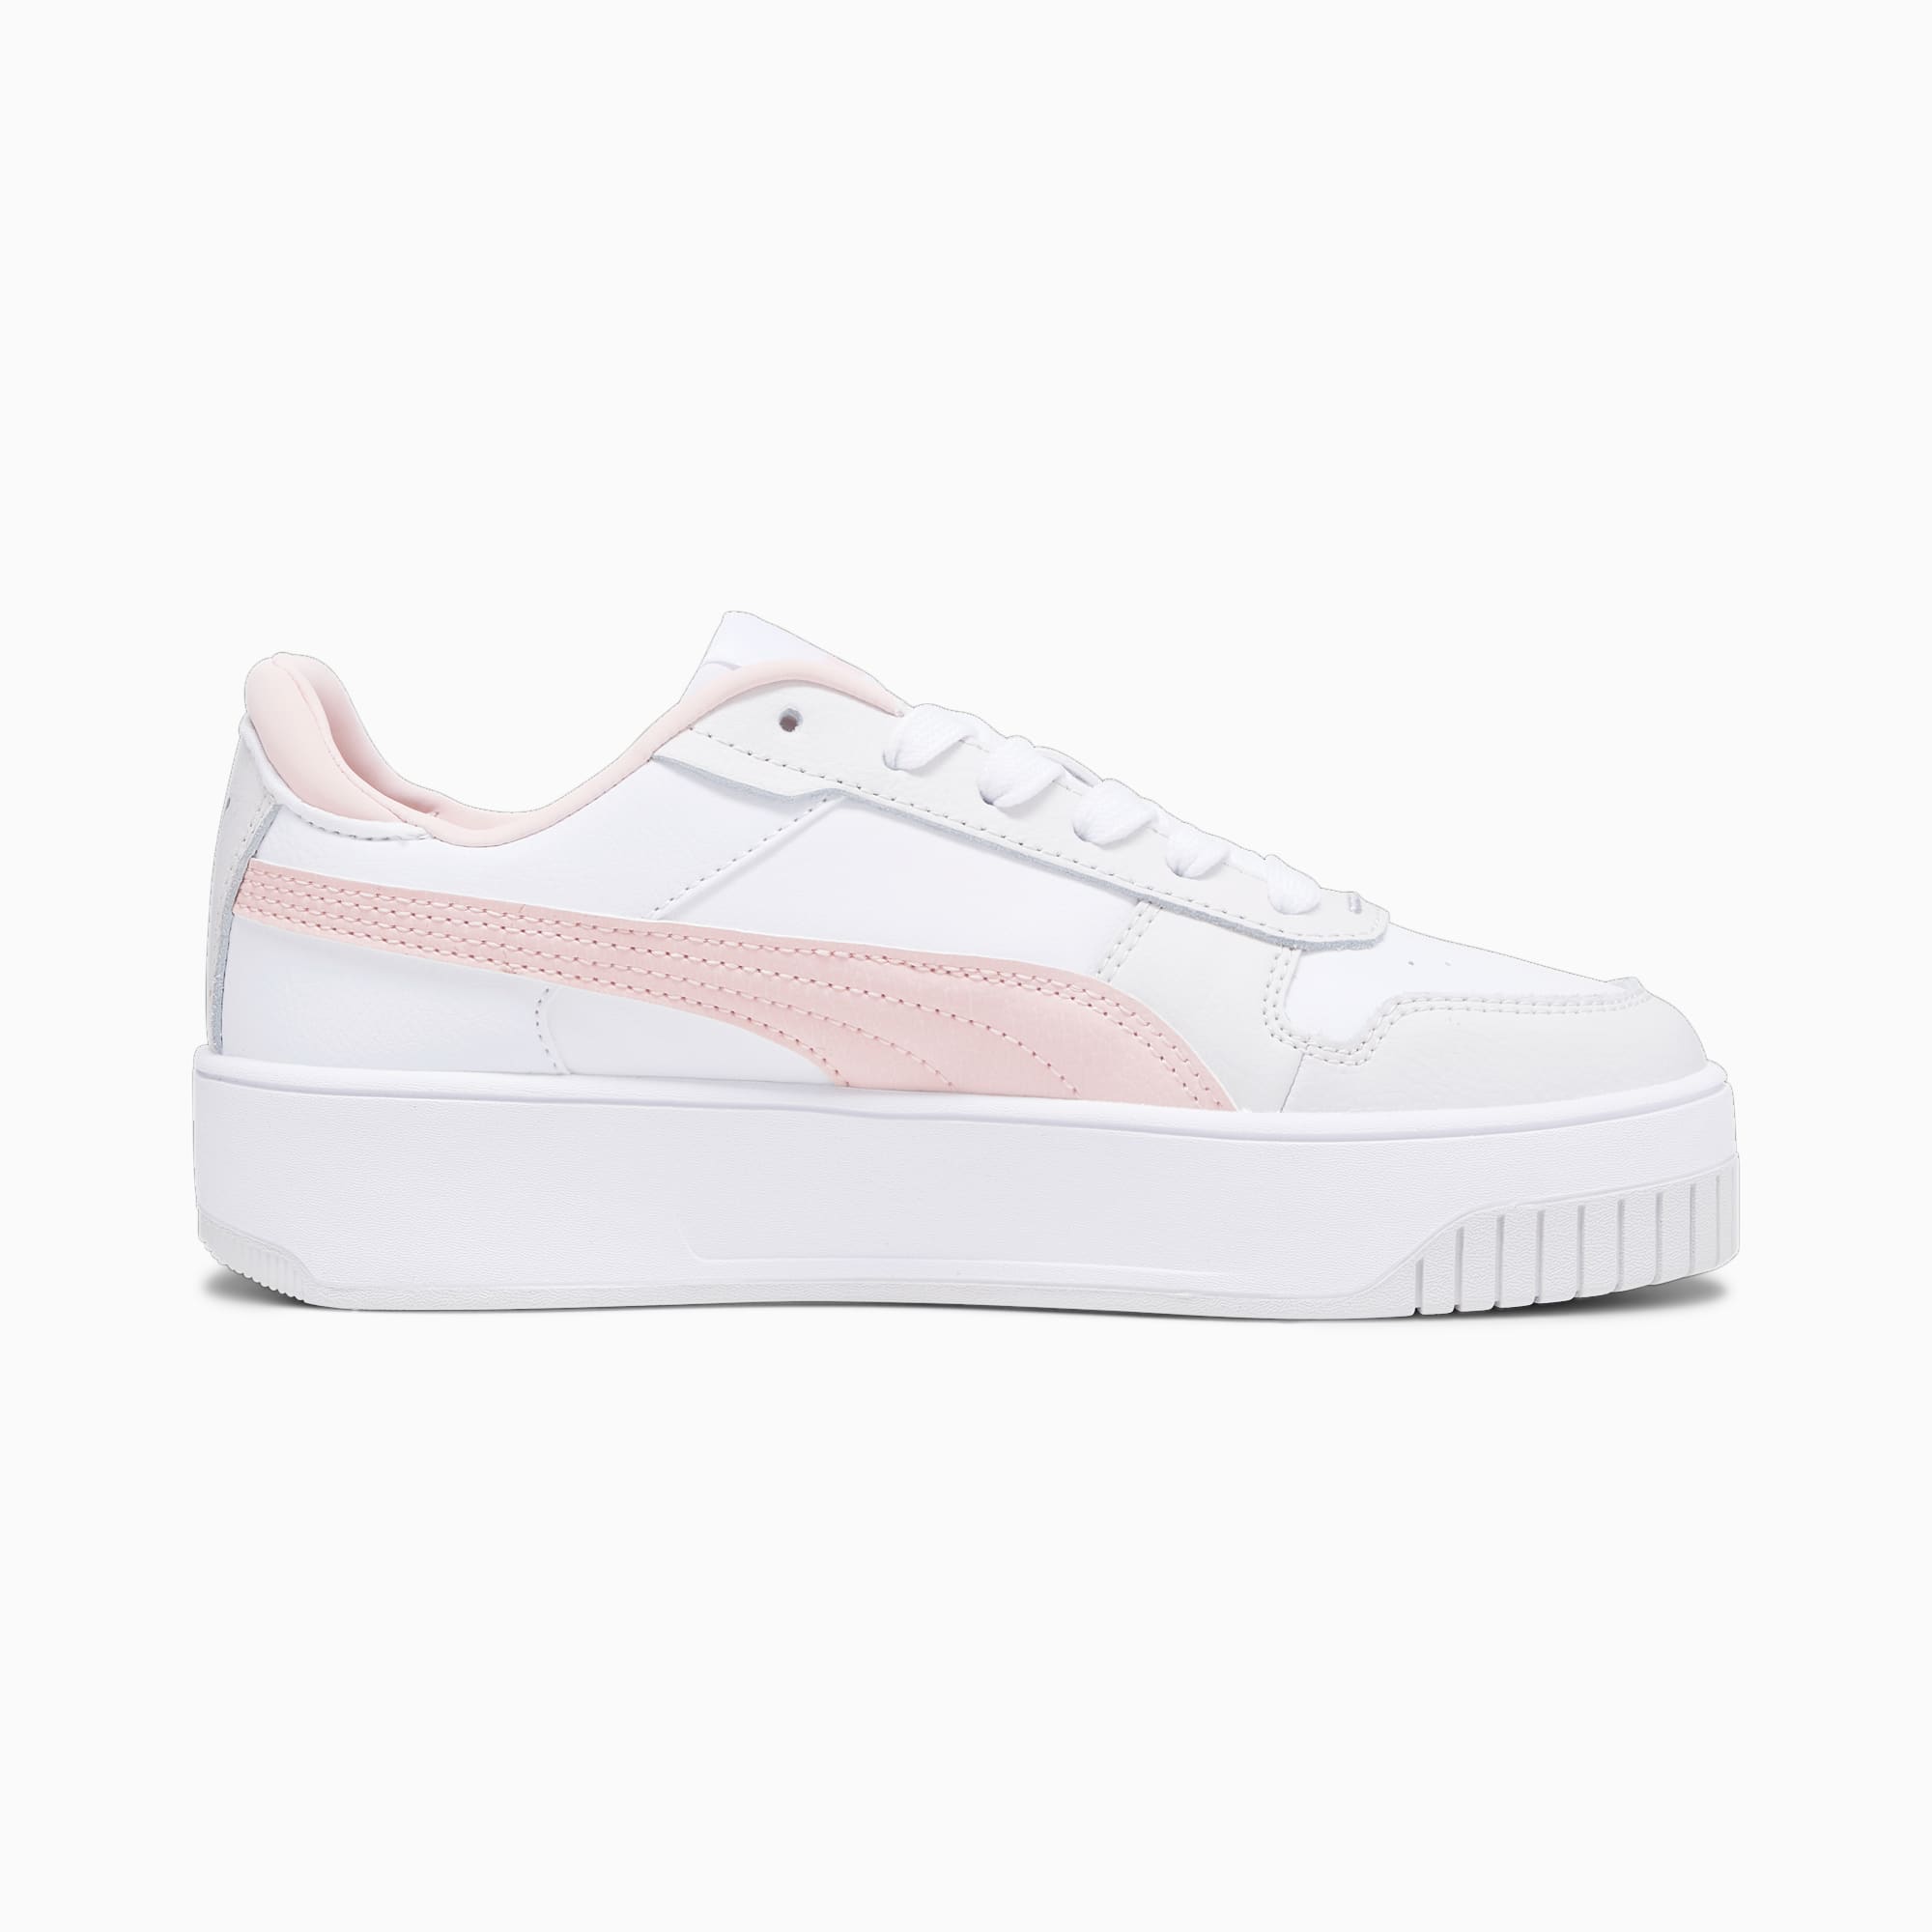 PUMA Carina Street Youth Sneakers, White/Rose Dust/Feather Grey